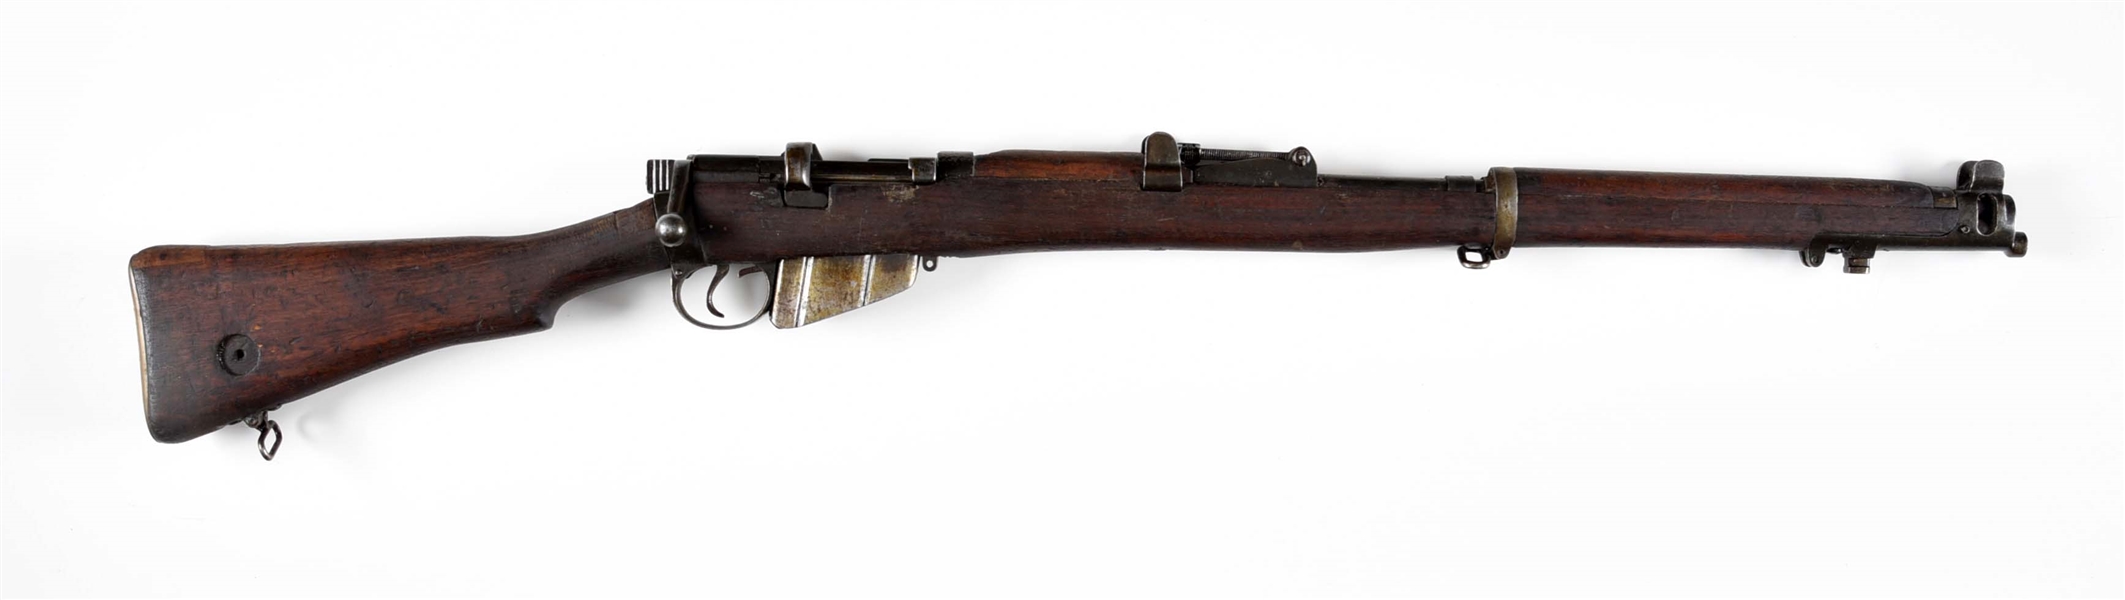 (C) 1918 DATED BRITISH ENFIELD NO. I MK III BOLT ACTION DRILL PURPOSE RIFLE.